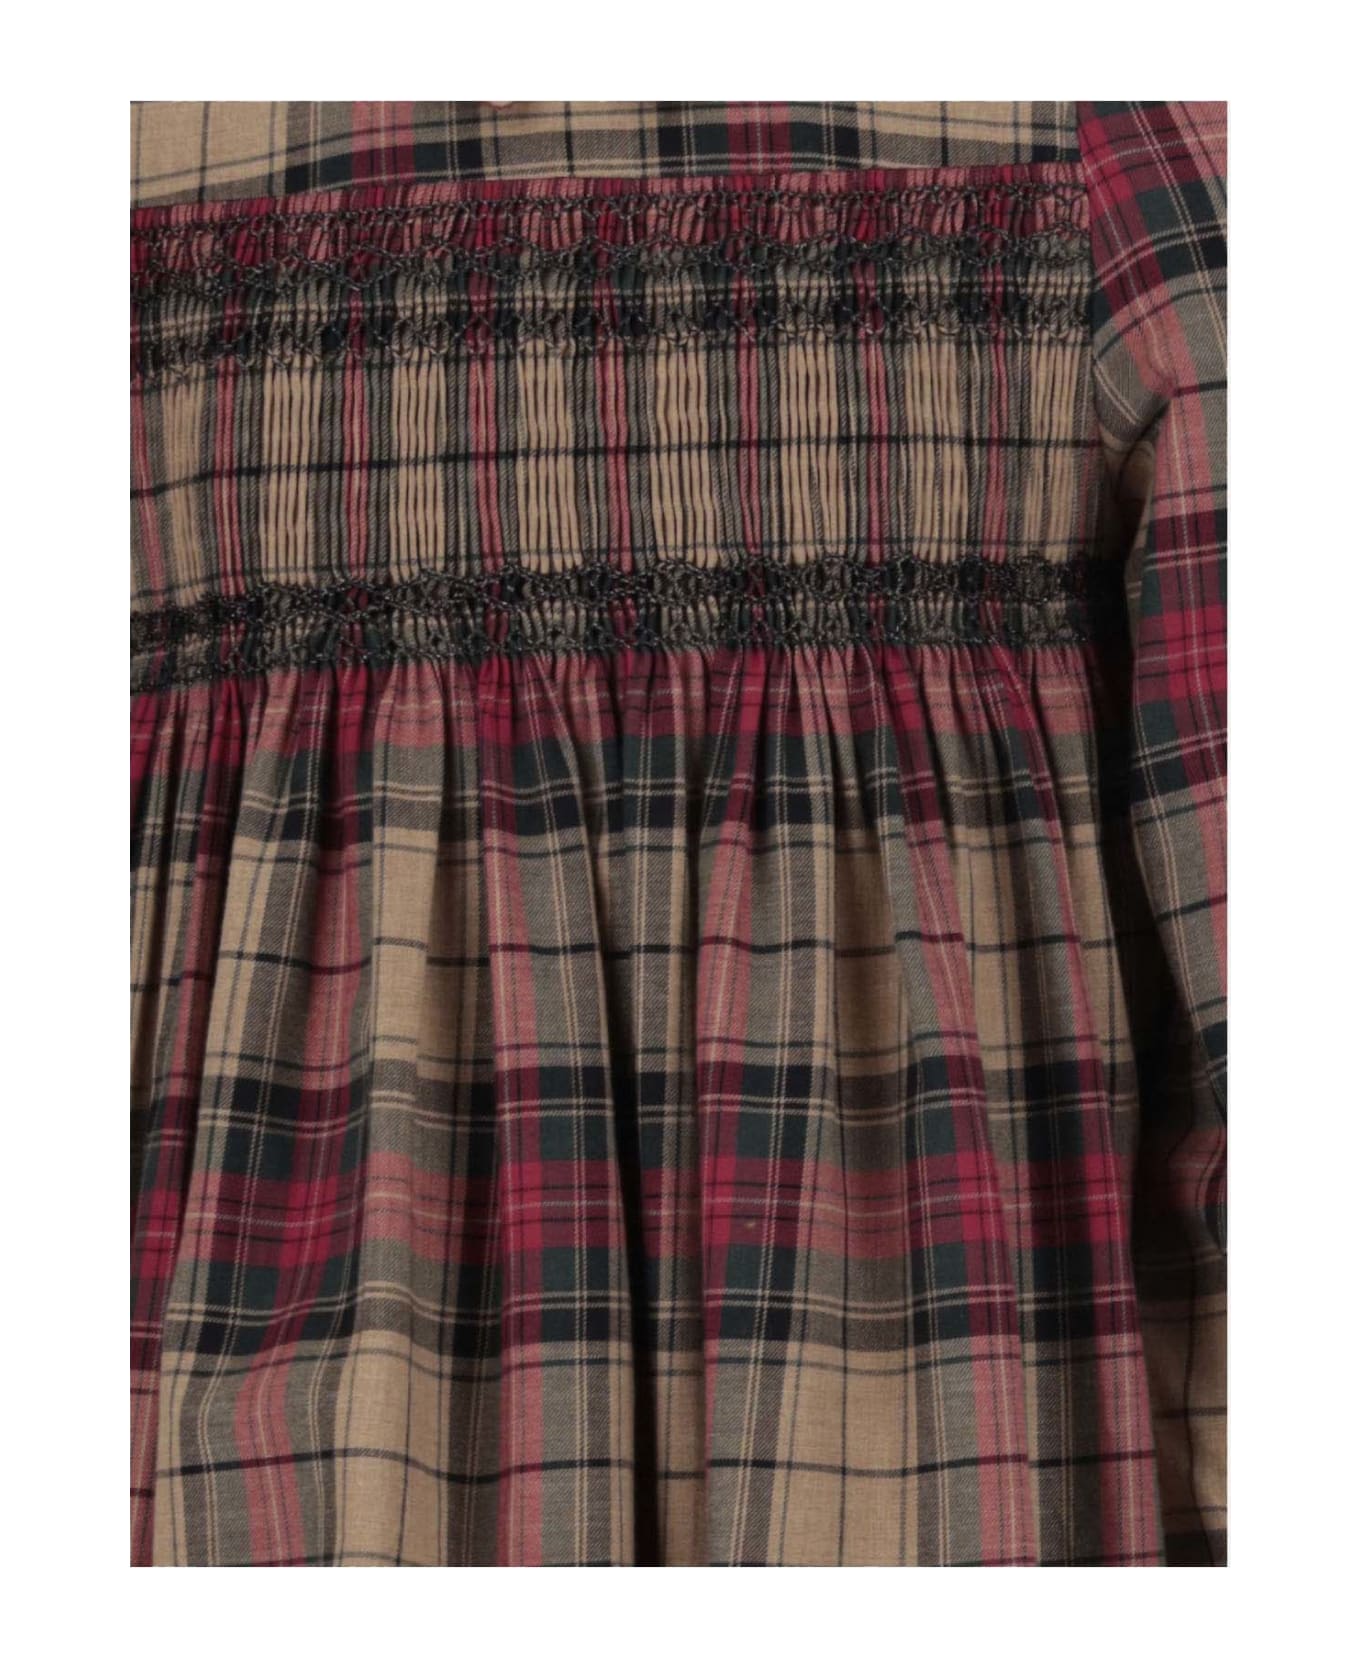 Bonpoint Cotton Dress With Check Pattern - BEIGE